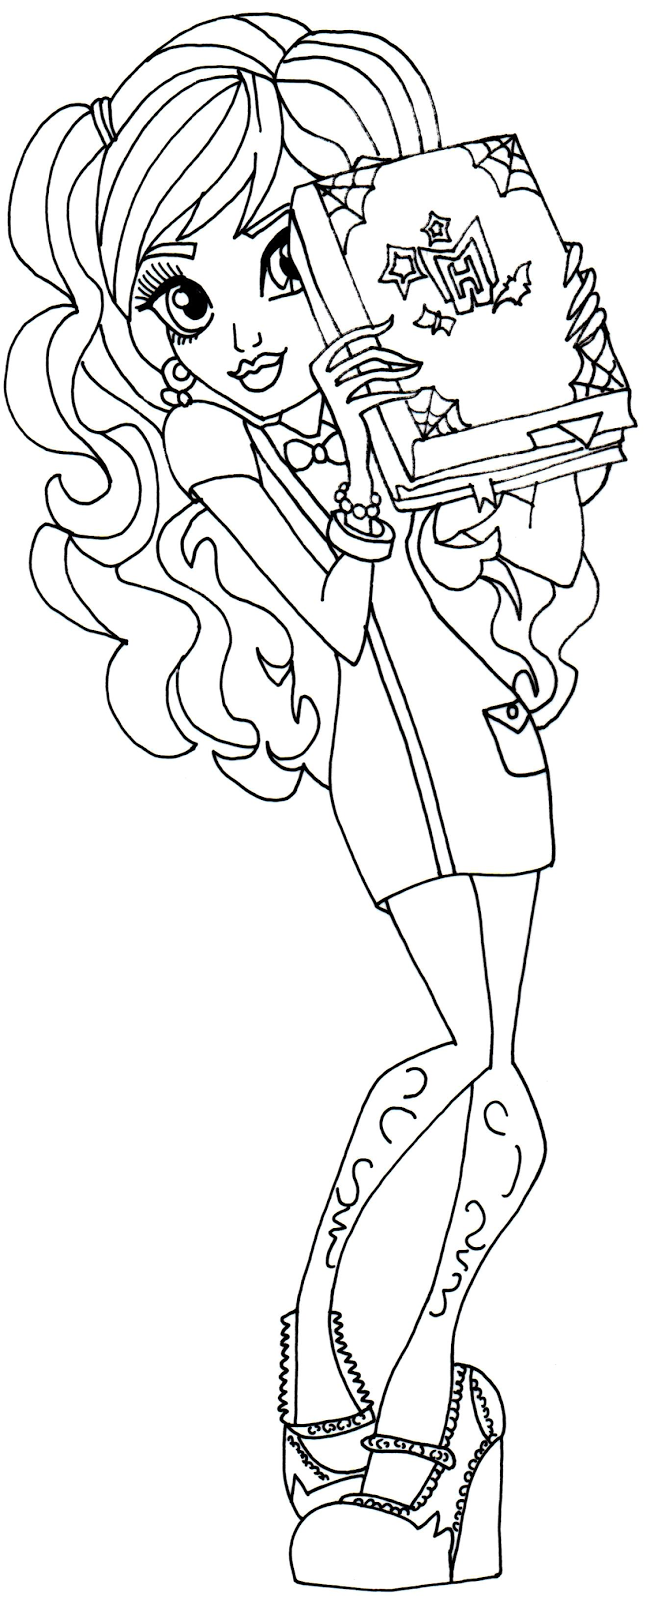 Free Printable Monster High Coloring Pages: January 2014